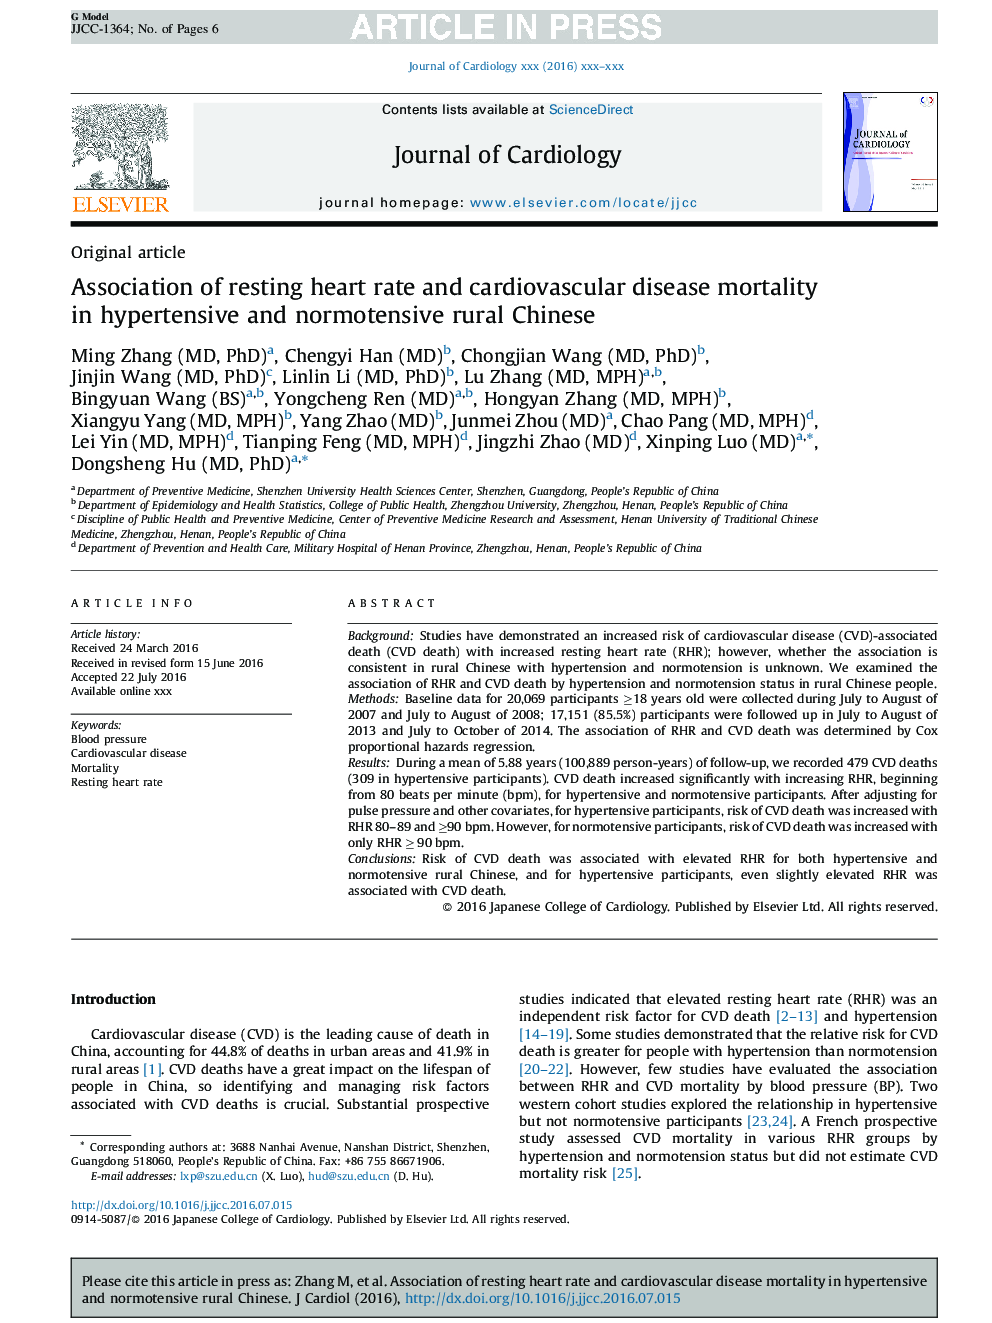 Association of resting heart rate and cardiovascular disease mortality in hypertensive and normotensive rural Chinese